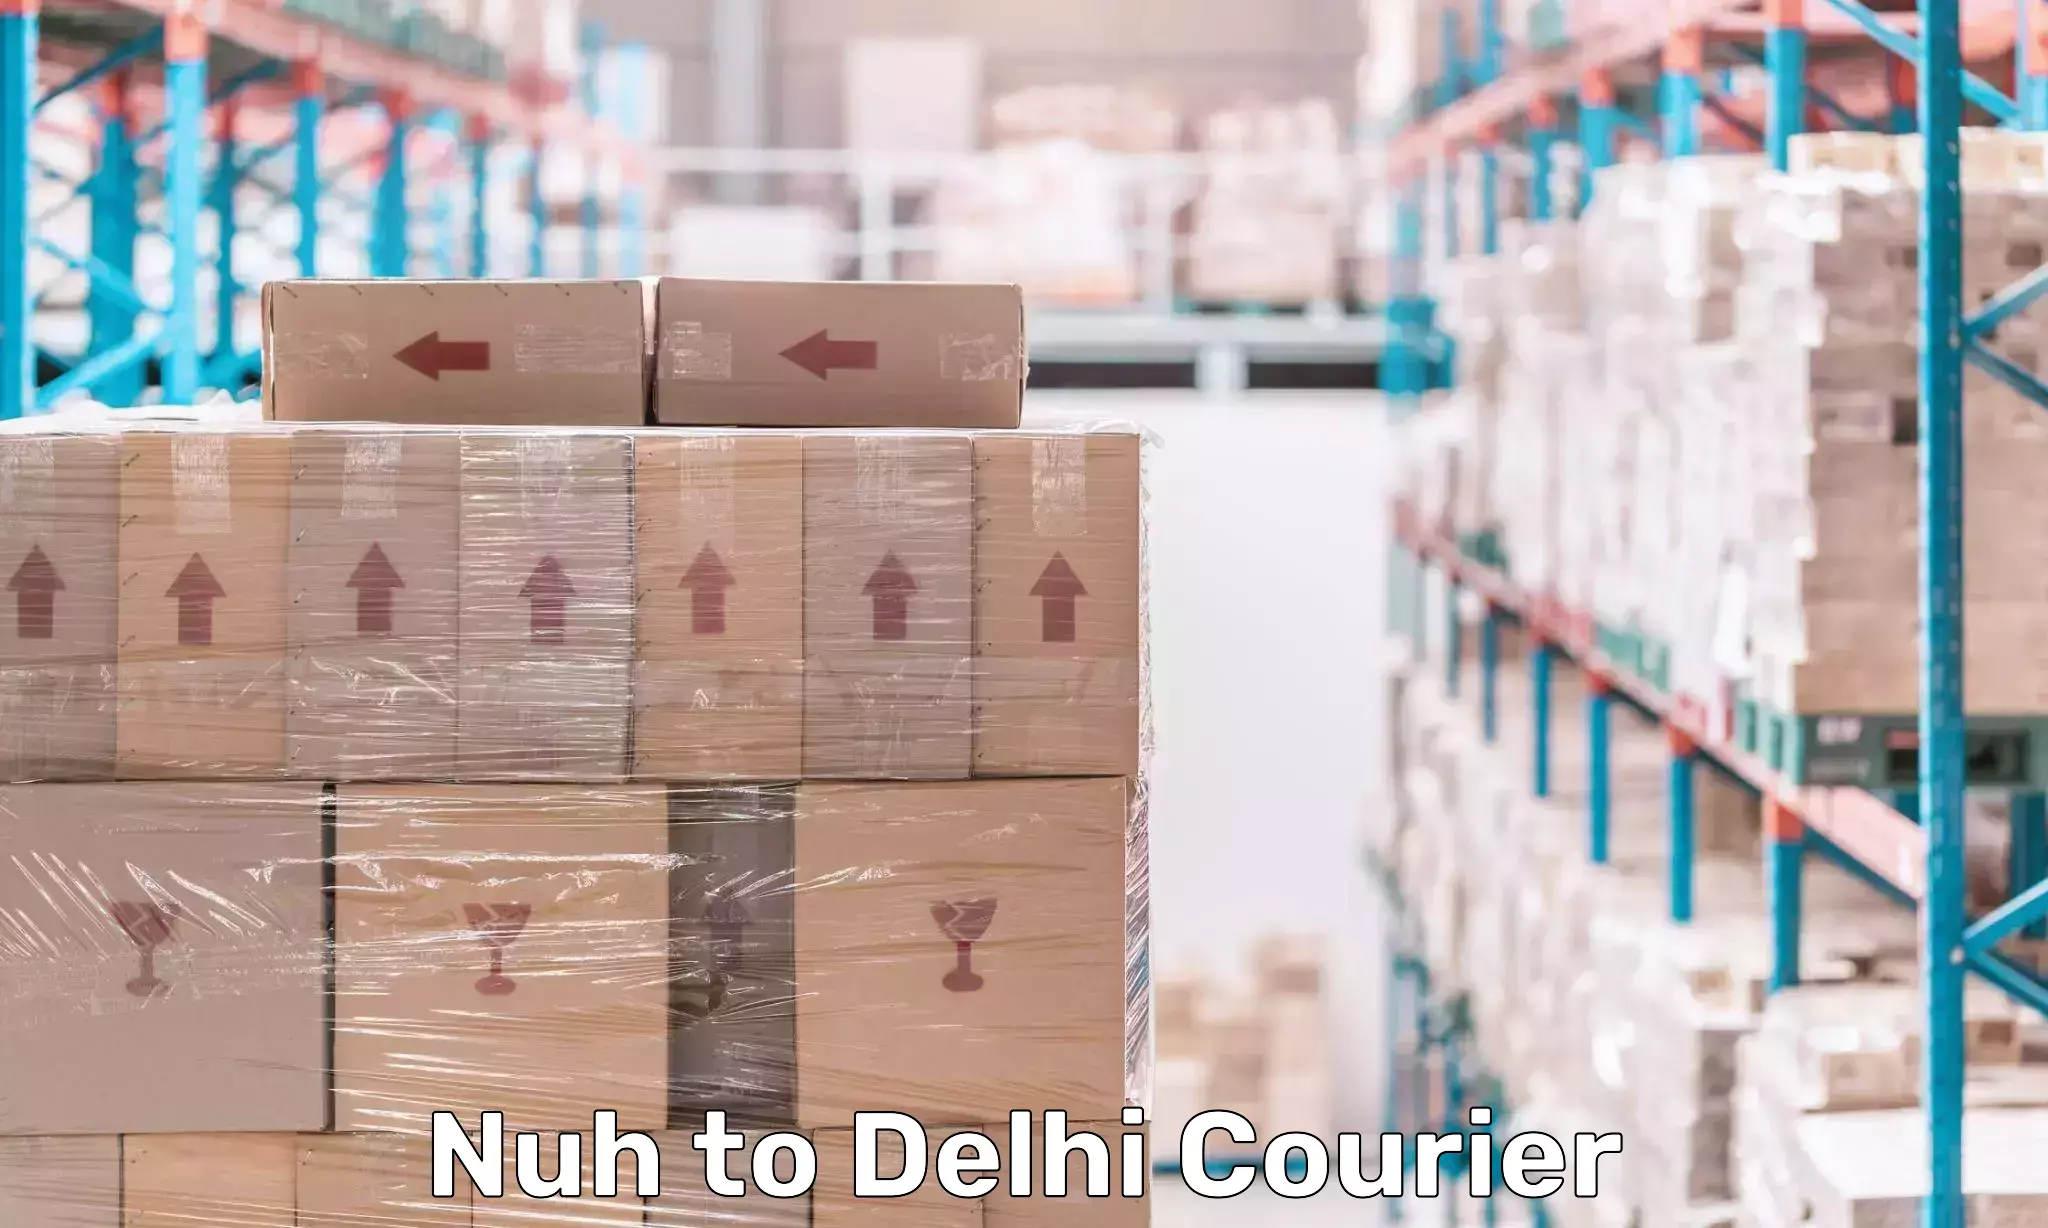 State-of-the-art courier technology Nuh to University of Delhi